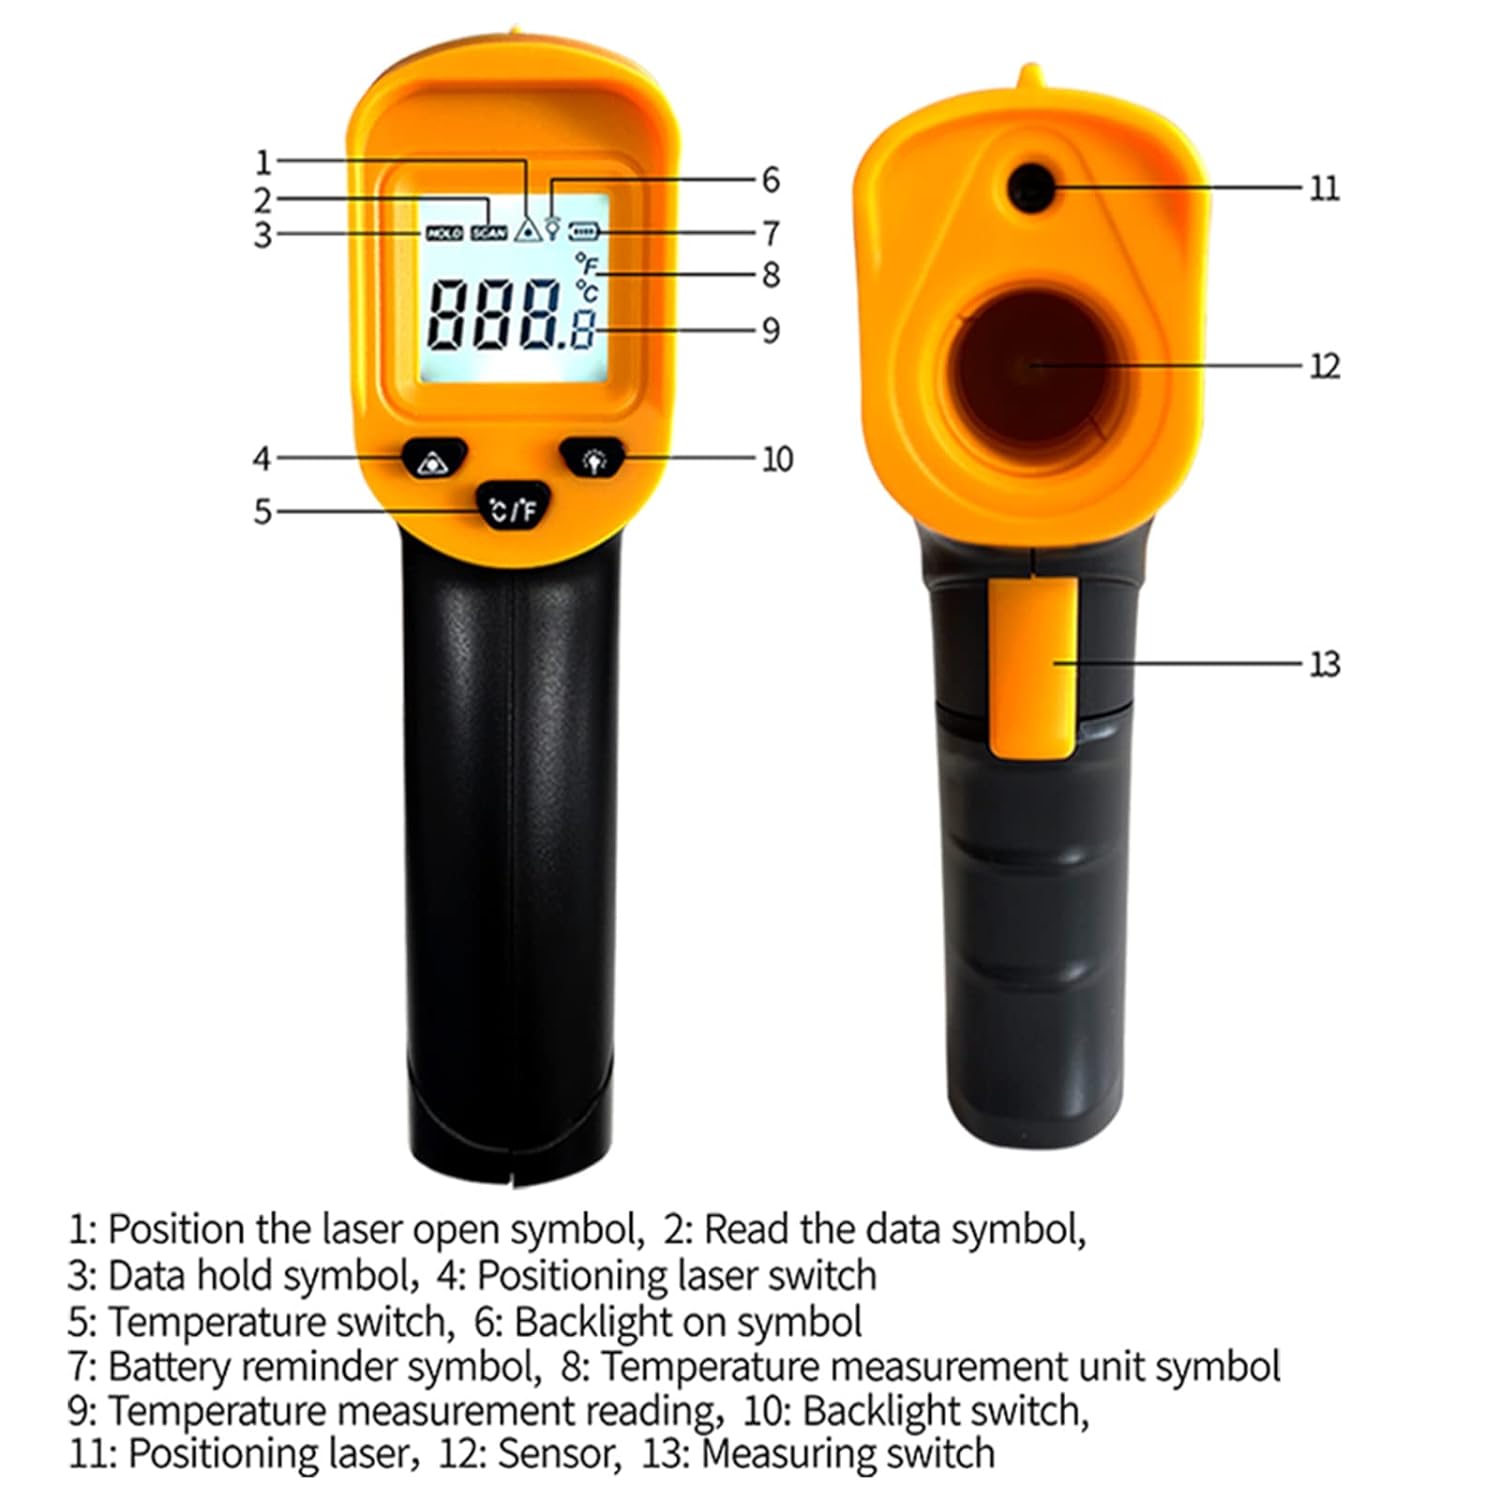 Digital Infrared Thermometer Gun for Cooking,BBQ,Pizza Oven,Ir Thermometer with Backlight,-58℉~932℉(-50℃~500℃) Handheld Non Contact Heat Laser Temperature Gun (Not for Human)